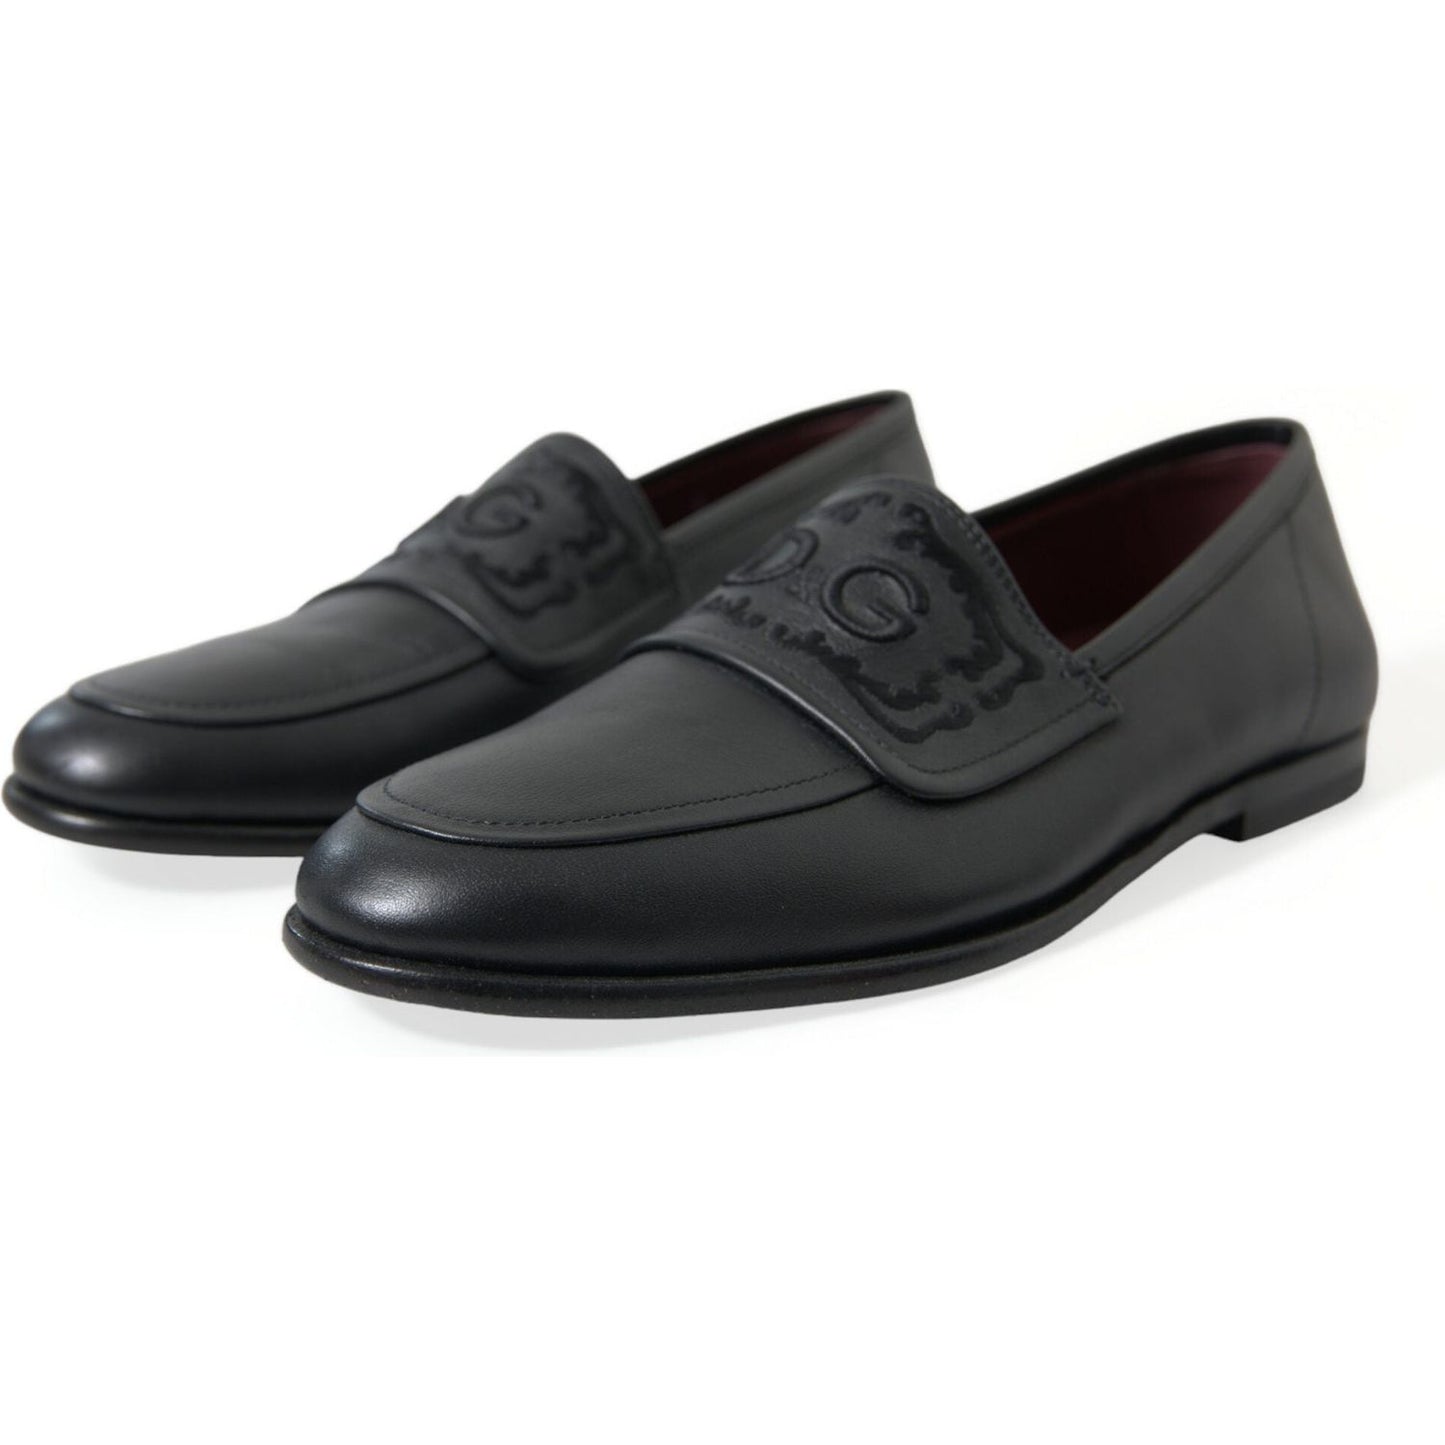 Dolce & Gabbana Elegant Black Embroidered Loafers black-leather-logo-embroidery-loafers-dress-shoes